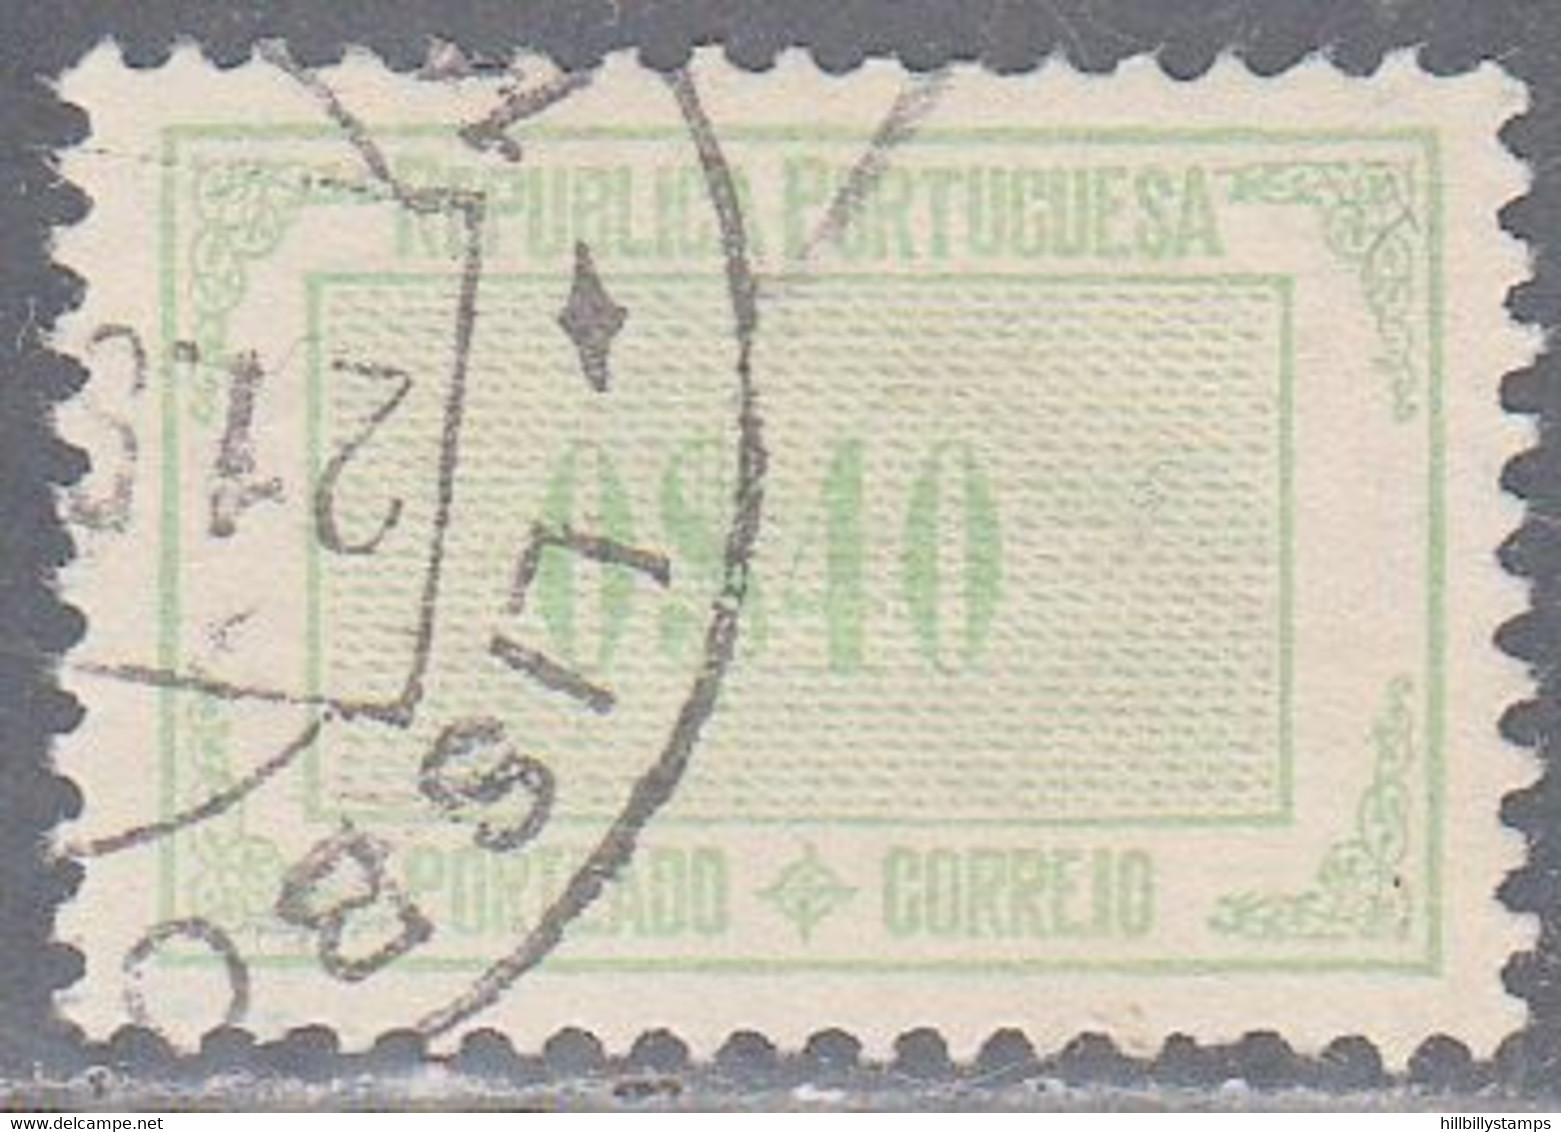 PORTUGAL   SCOTT NO J49   USED   YEAR  1932 - Used Stamps